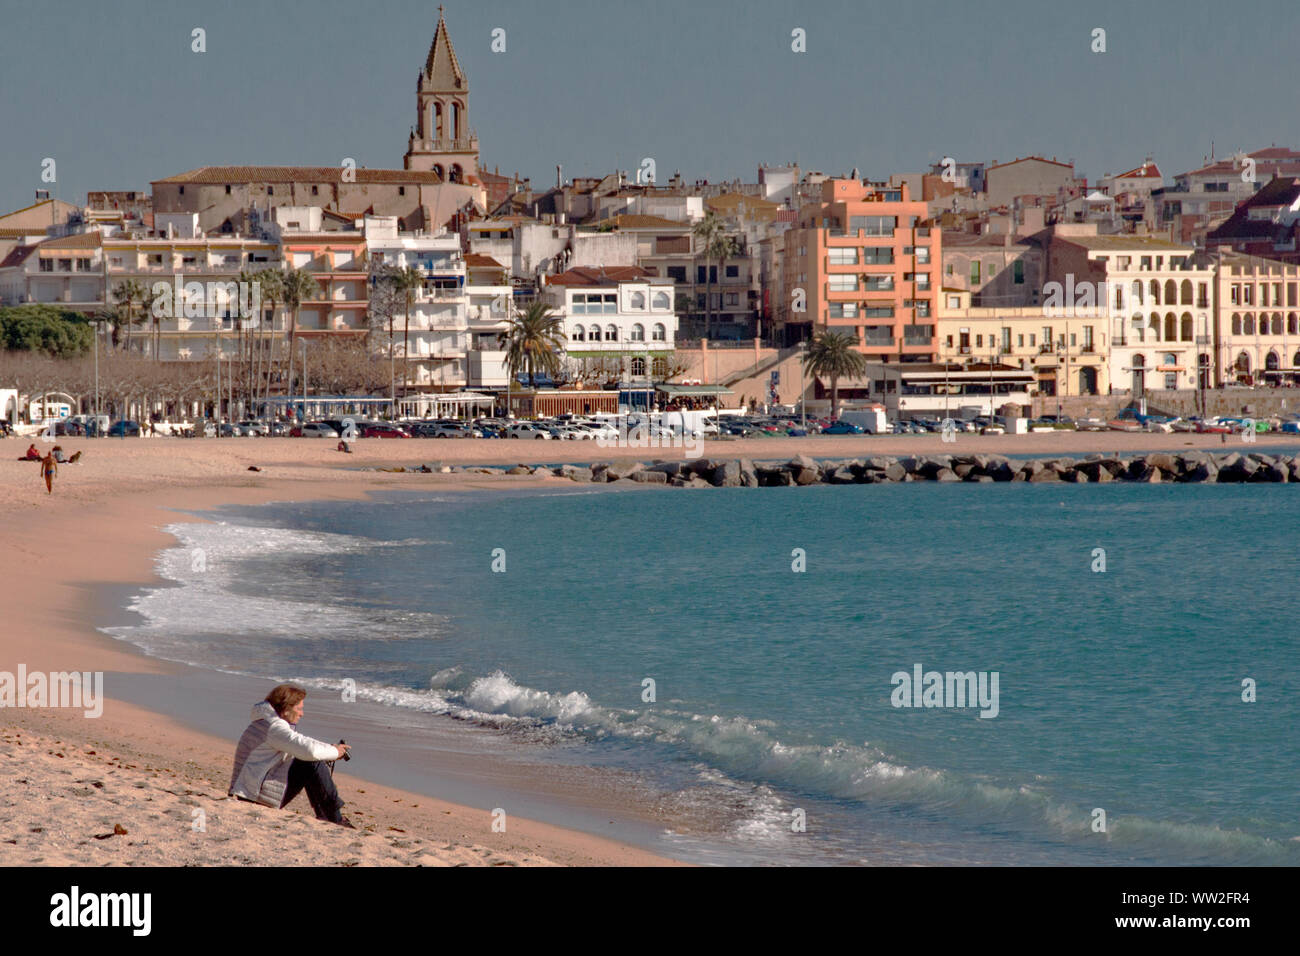 A woman sits contemplating on the beach of Palamos, Catalunya, Spain Stock Photo